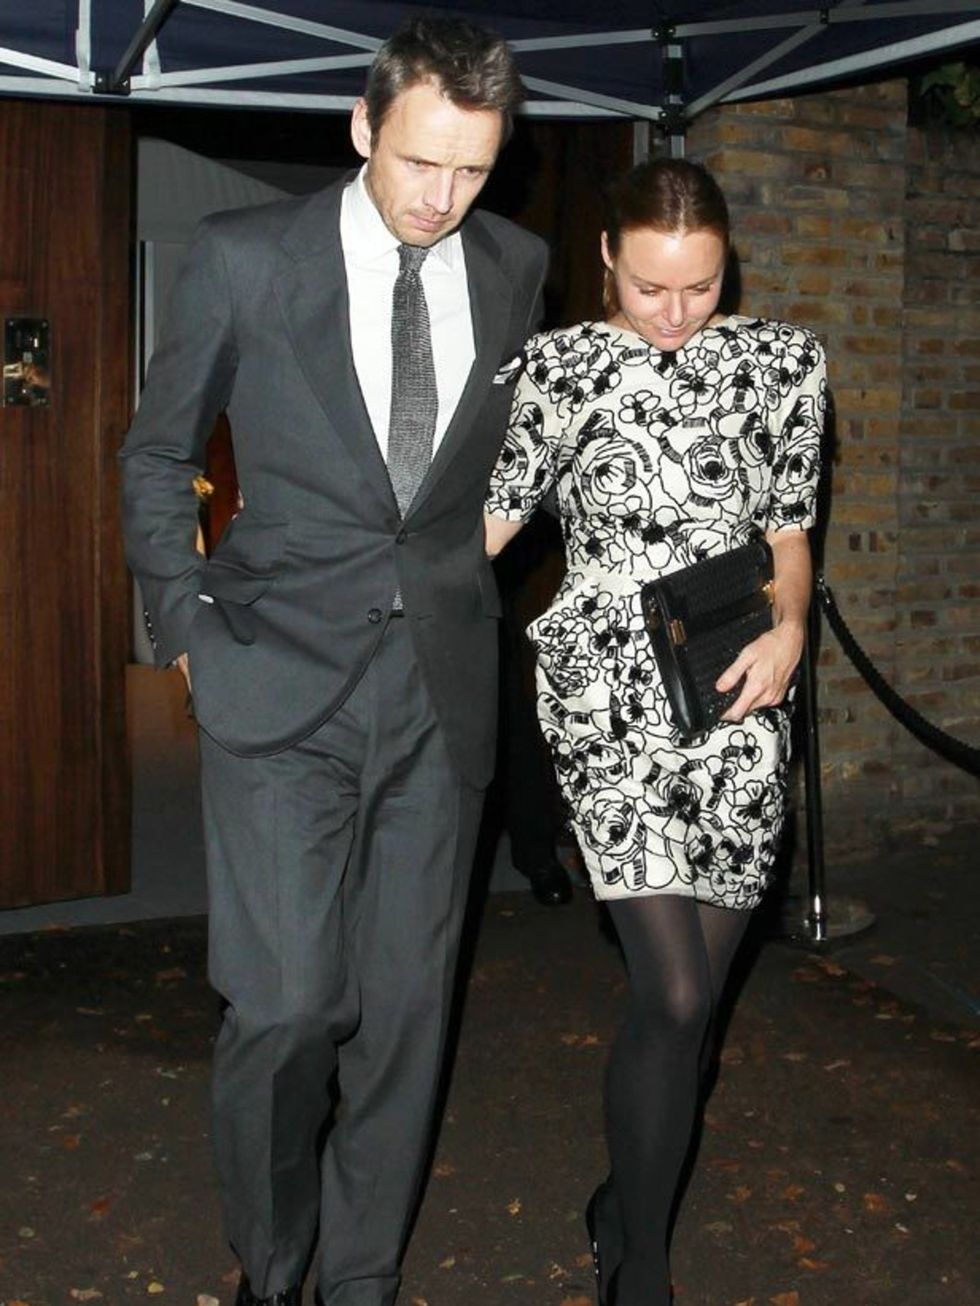 <p><a href="http://www.elleuk.com/catwalk/collections/stella-mccartney/autumn-winter-2011/review">Stella McCartney</a> and husband attended the wedding of Paul McCartney and Nancy Shevell in London, October 2011.</p>